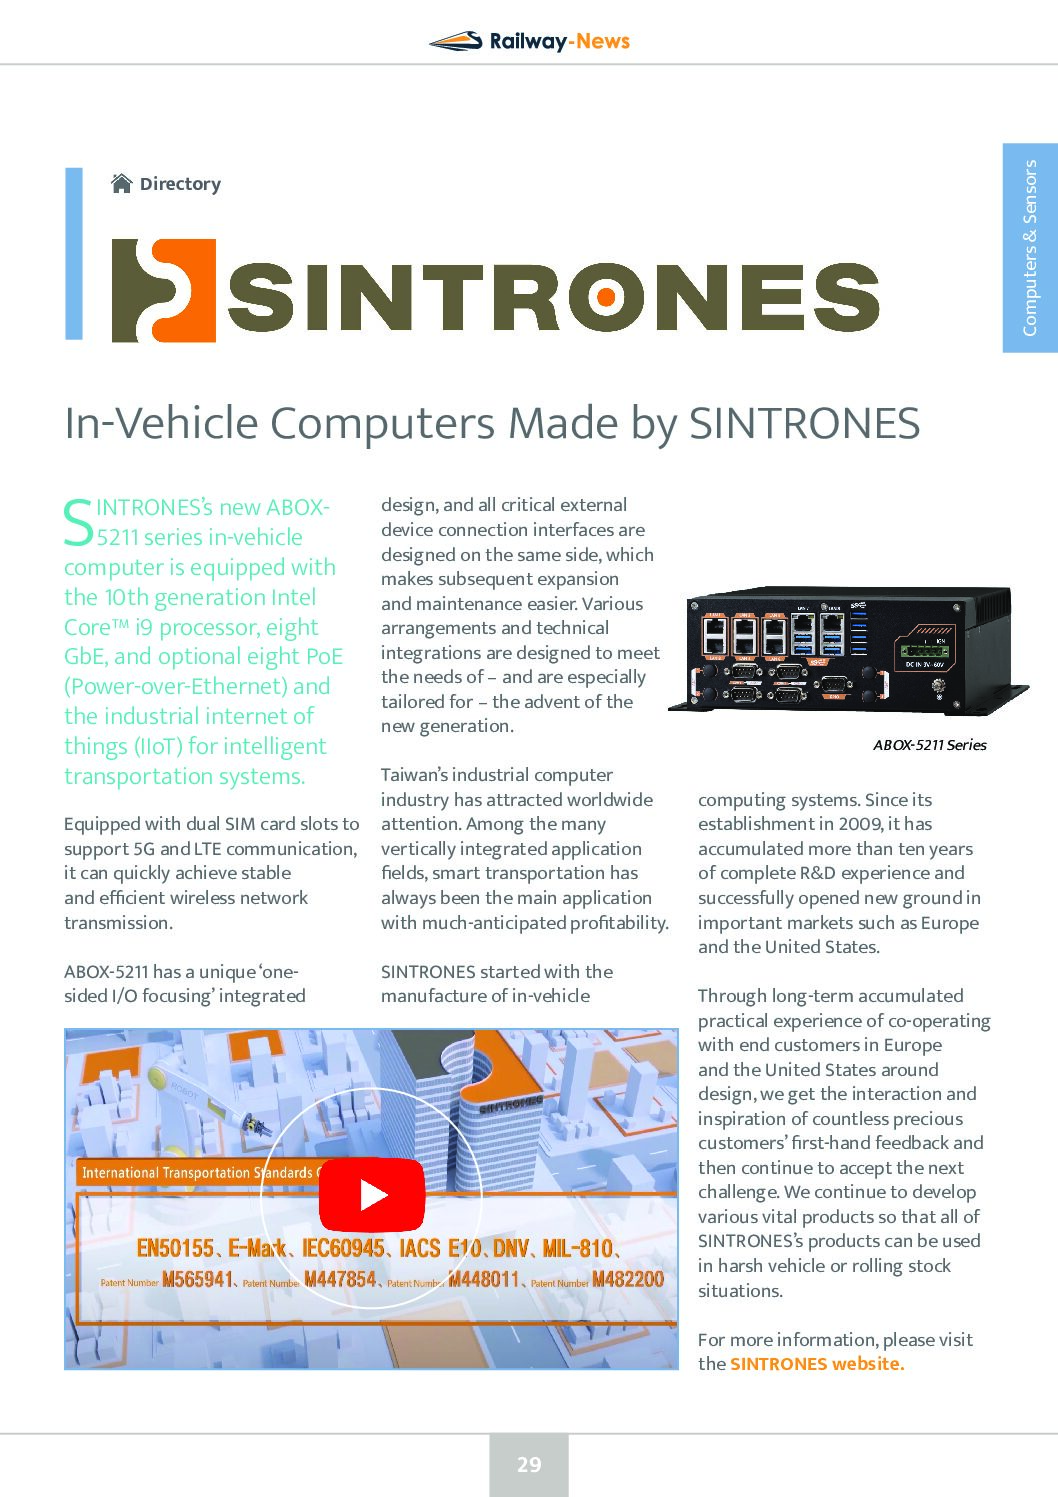 In-Vehicle Computers Made by SINTRONES